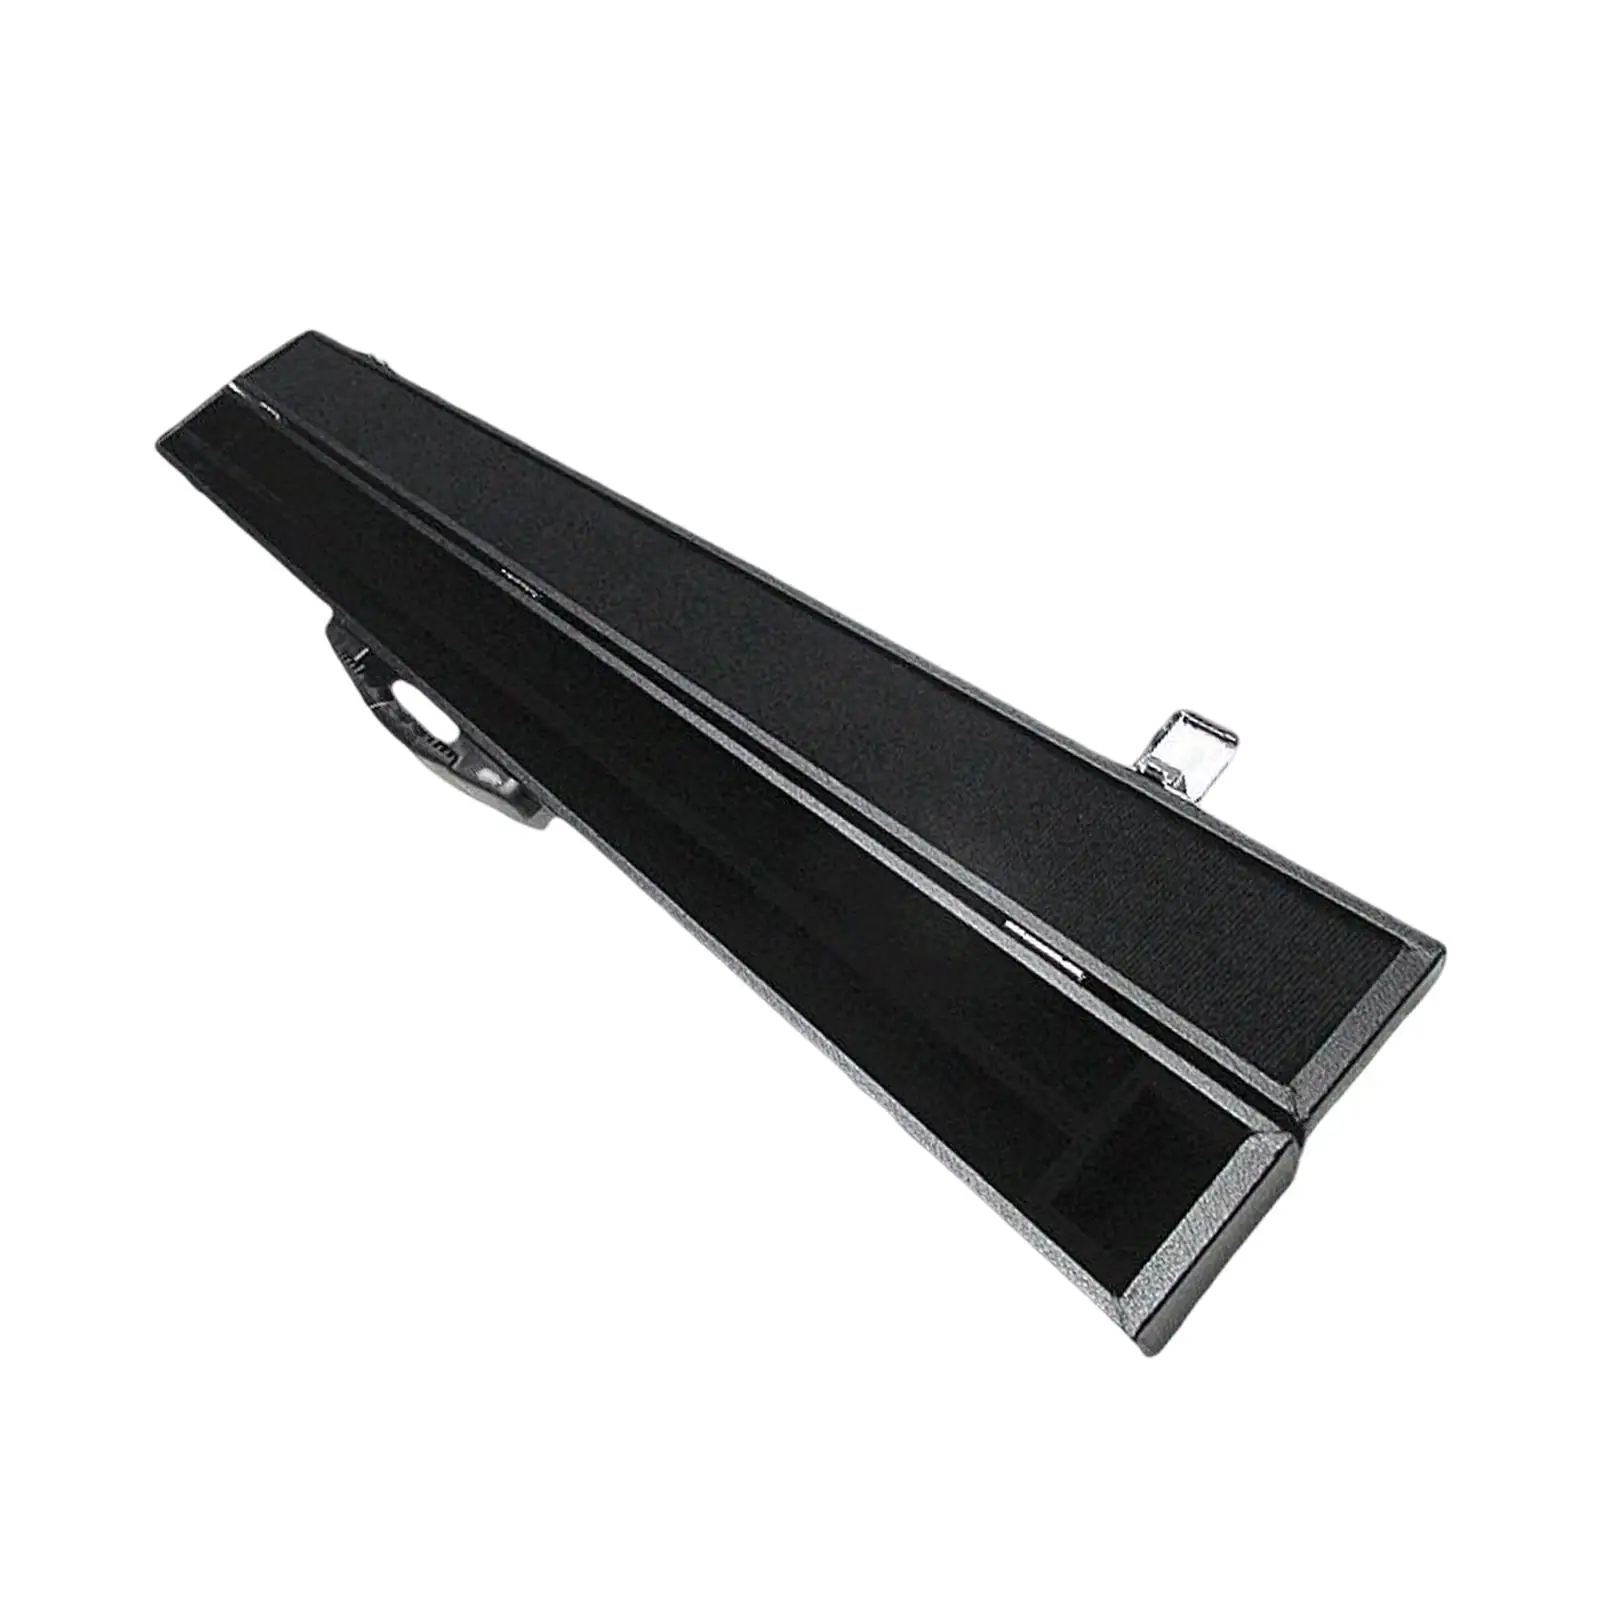 Pool Billiard  Case Snooker  PU Leather Exterior Box Black Heavy Duty Holds 1 Complete   (1 Handle/1 Shaft)